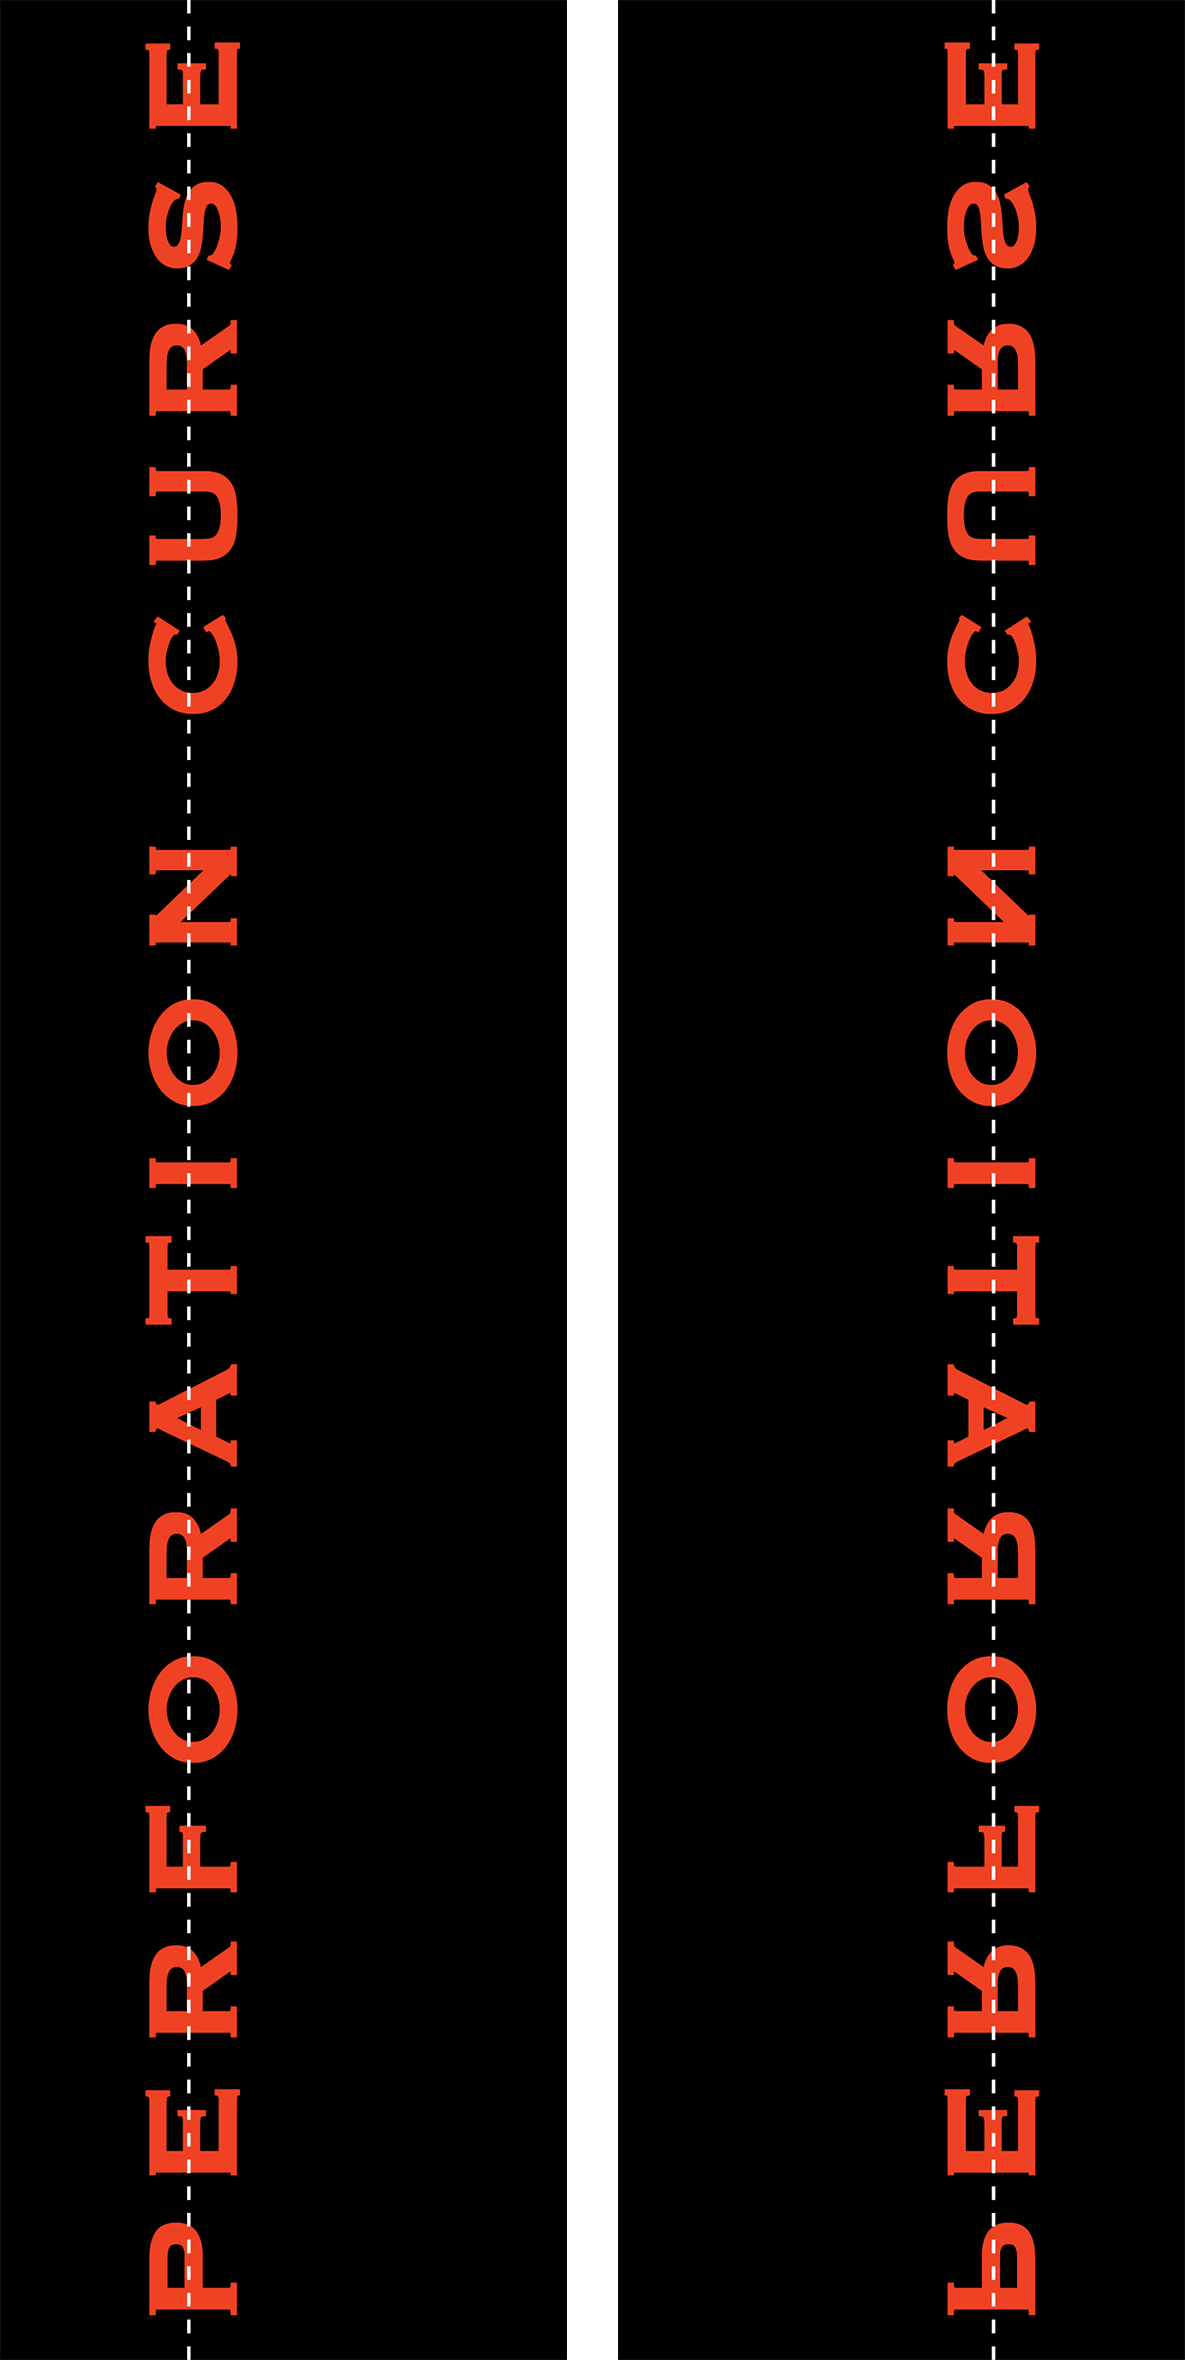 The front of the issue’s bookmark with the words “Perforation Curse” printed in red on a black background along the perforation line. The back of the issue’s bookmark reads: “Perforation Curse” printed in red on a black background, in mirror reverse, along the perforation line.